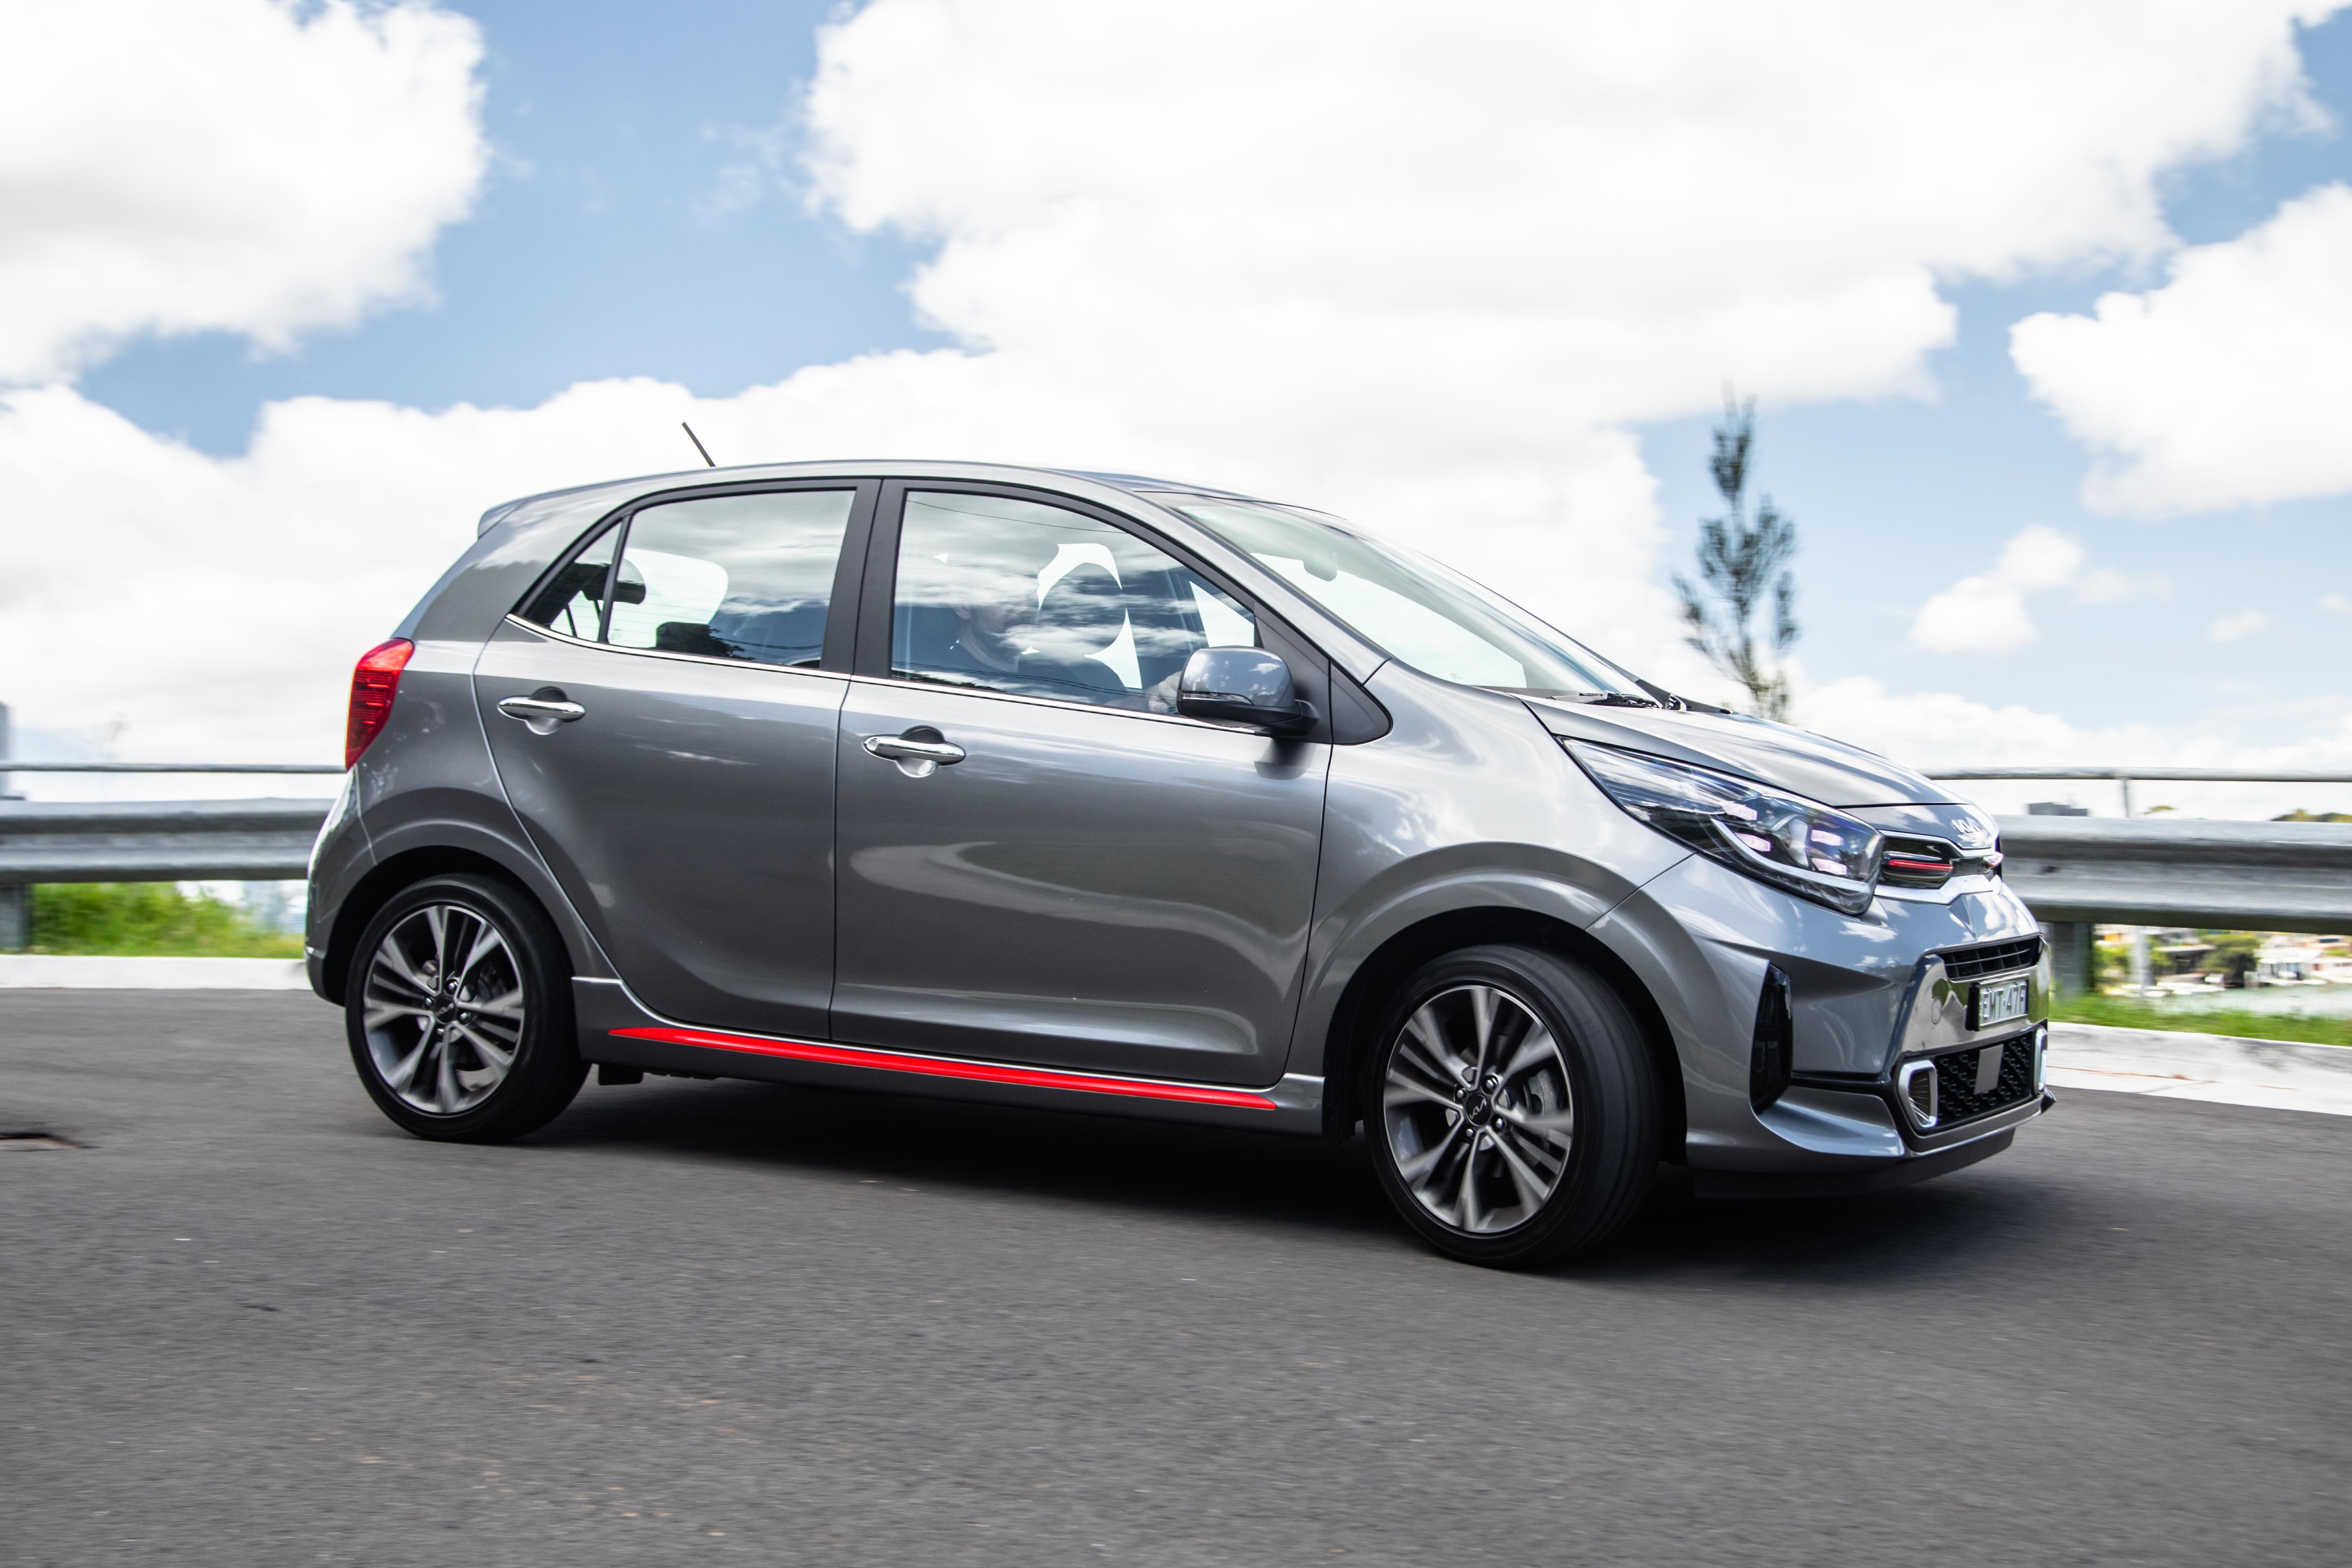 Kia Picanto GT track review (inc. lap time!)